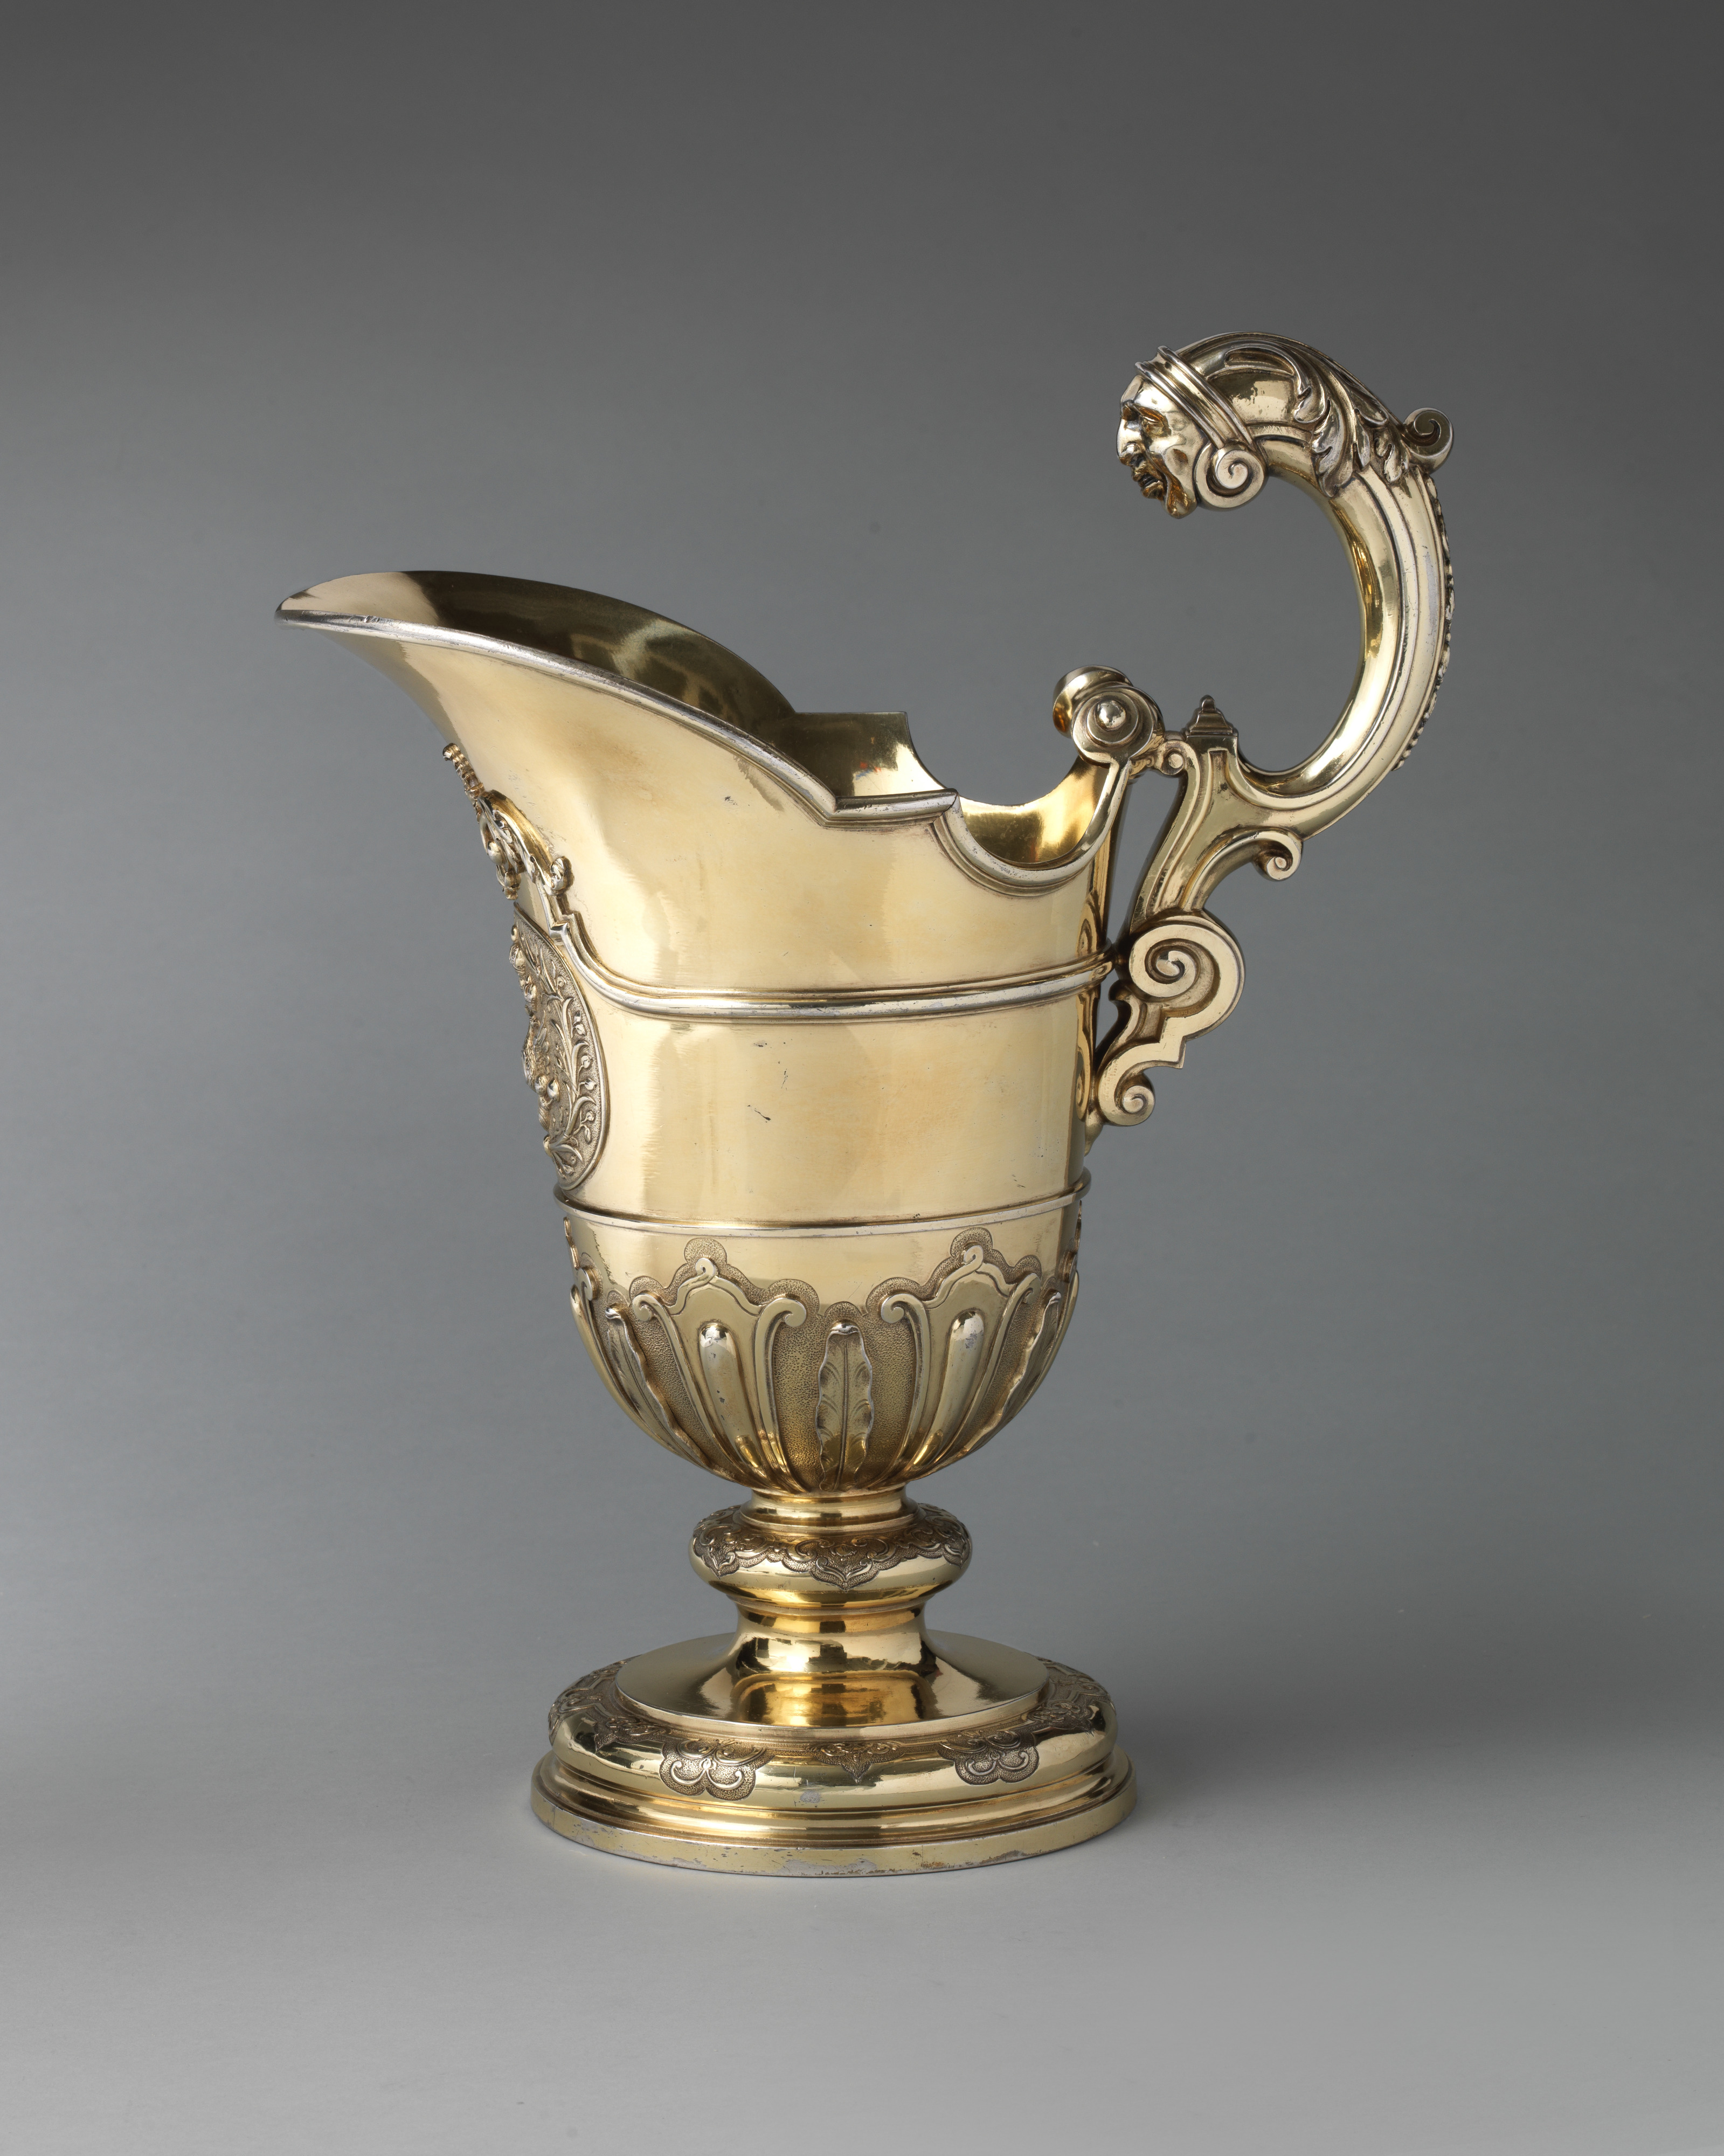 Russian Silver-Gilt Imperial Trophy